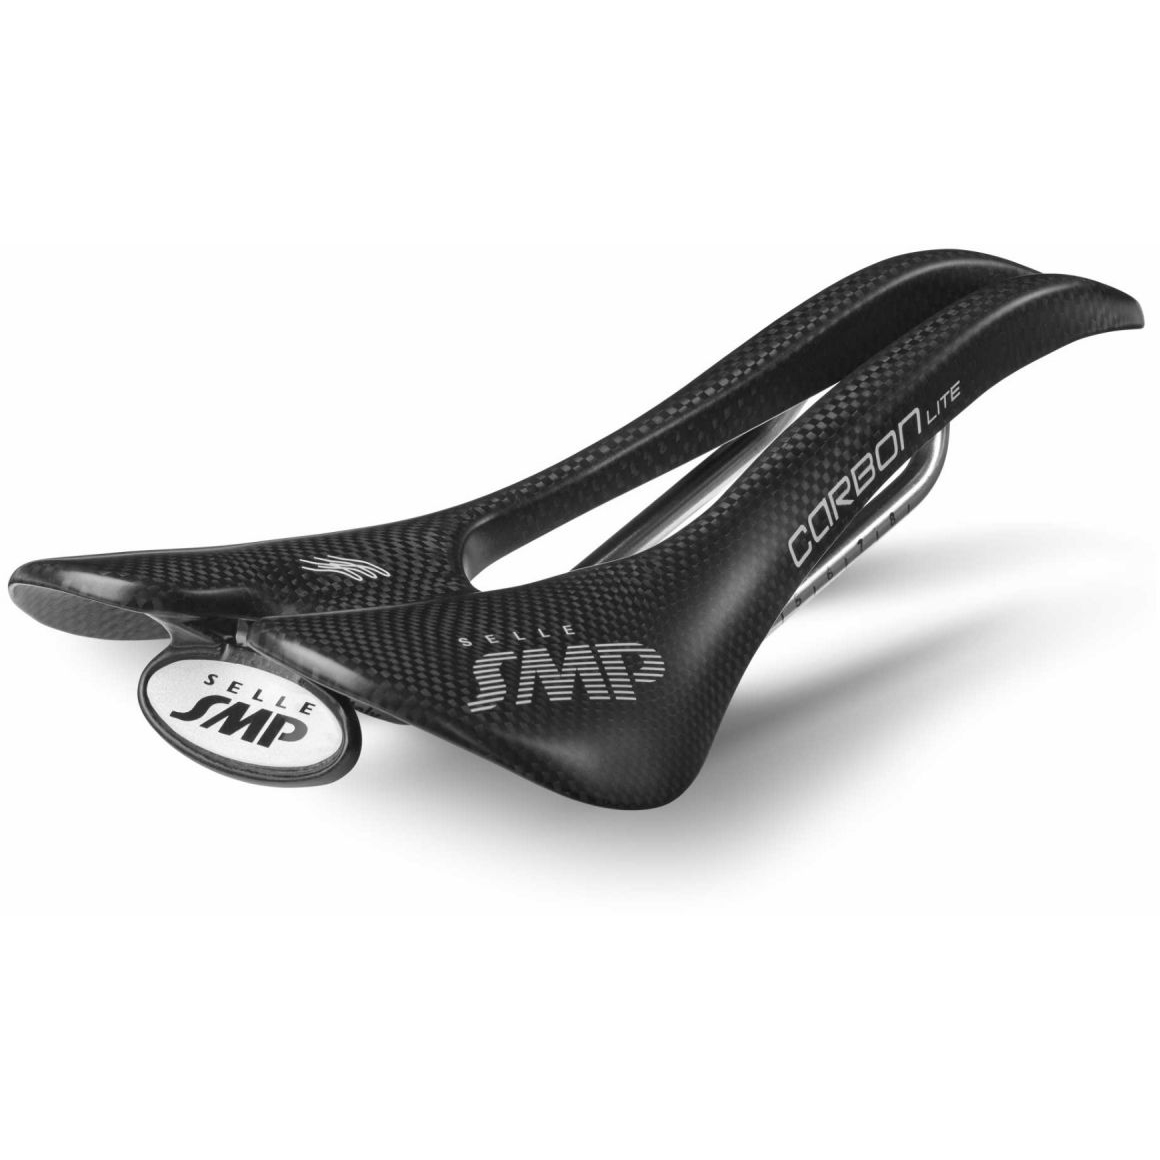 Picture of Selle SMP Carbon Lite Saddle - black